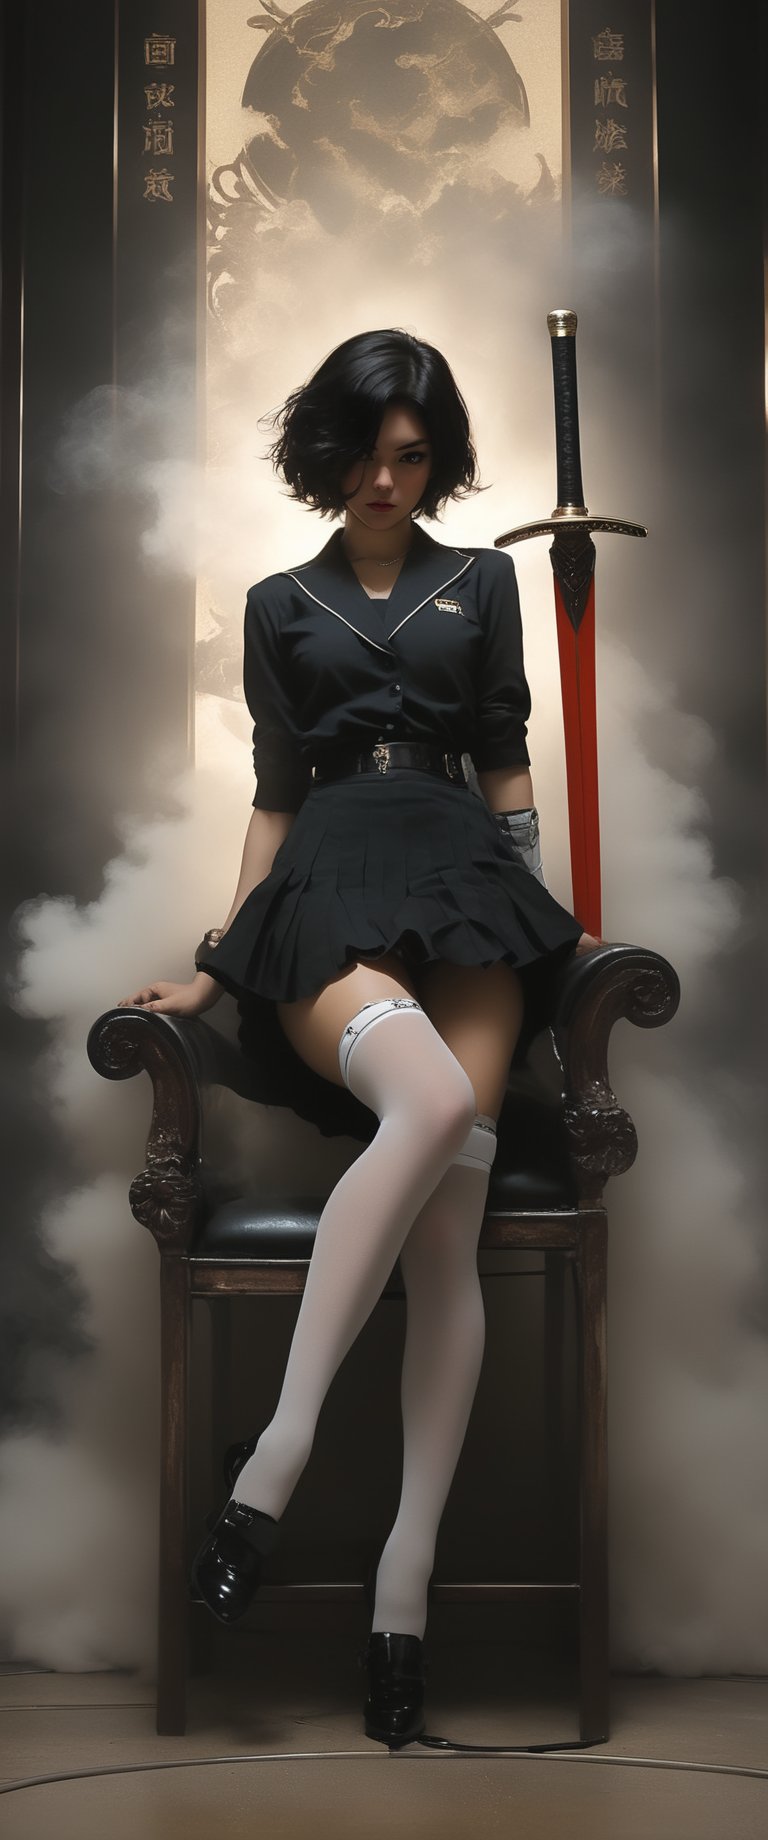 1 woman, black sailor school uniform, sitting in a chair holding a sword, short hair, masterpiece, absurdes, chiarosaurio, mucha, sexy pose, tense athmosfere, detailed background,Short skirt with white over-the-knee stockings, garter belt on calf, sensual and sexy, cyberpunk new tokyo yakuza ambient background with ambient smoke, inside, ct-fujiii,ct-jeniiii